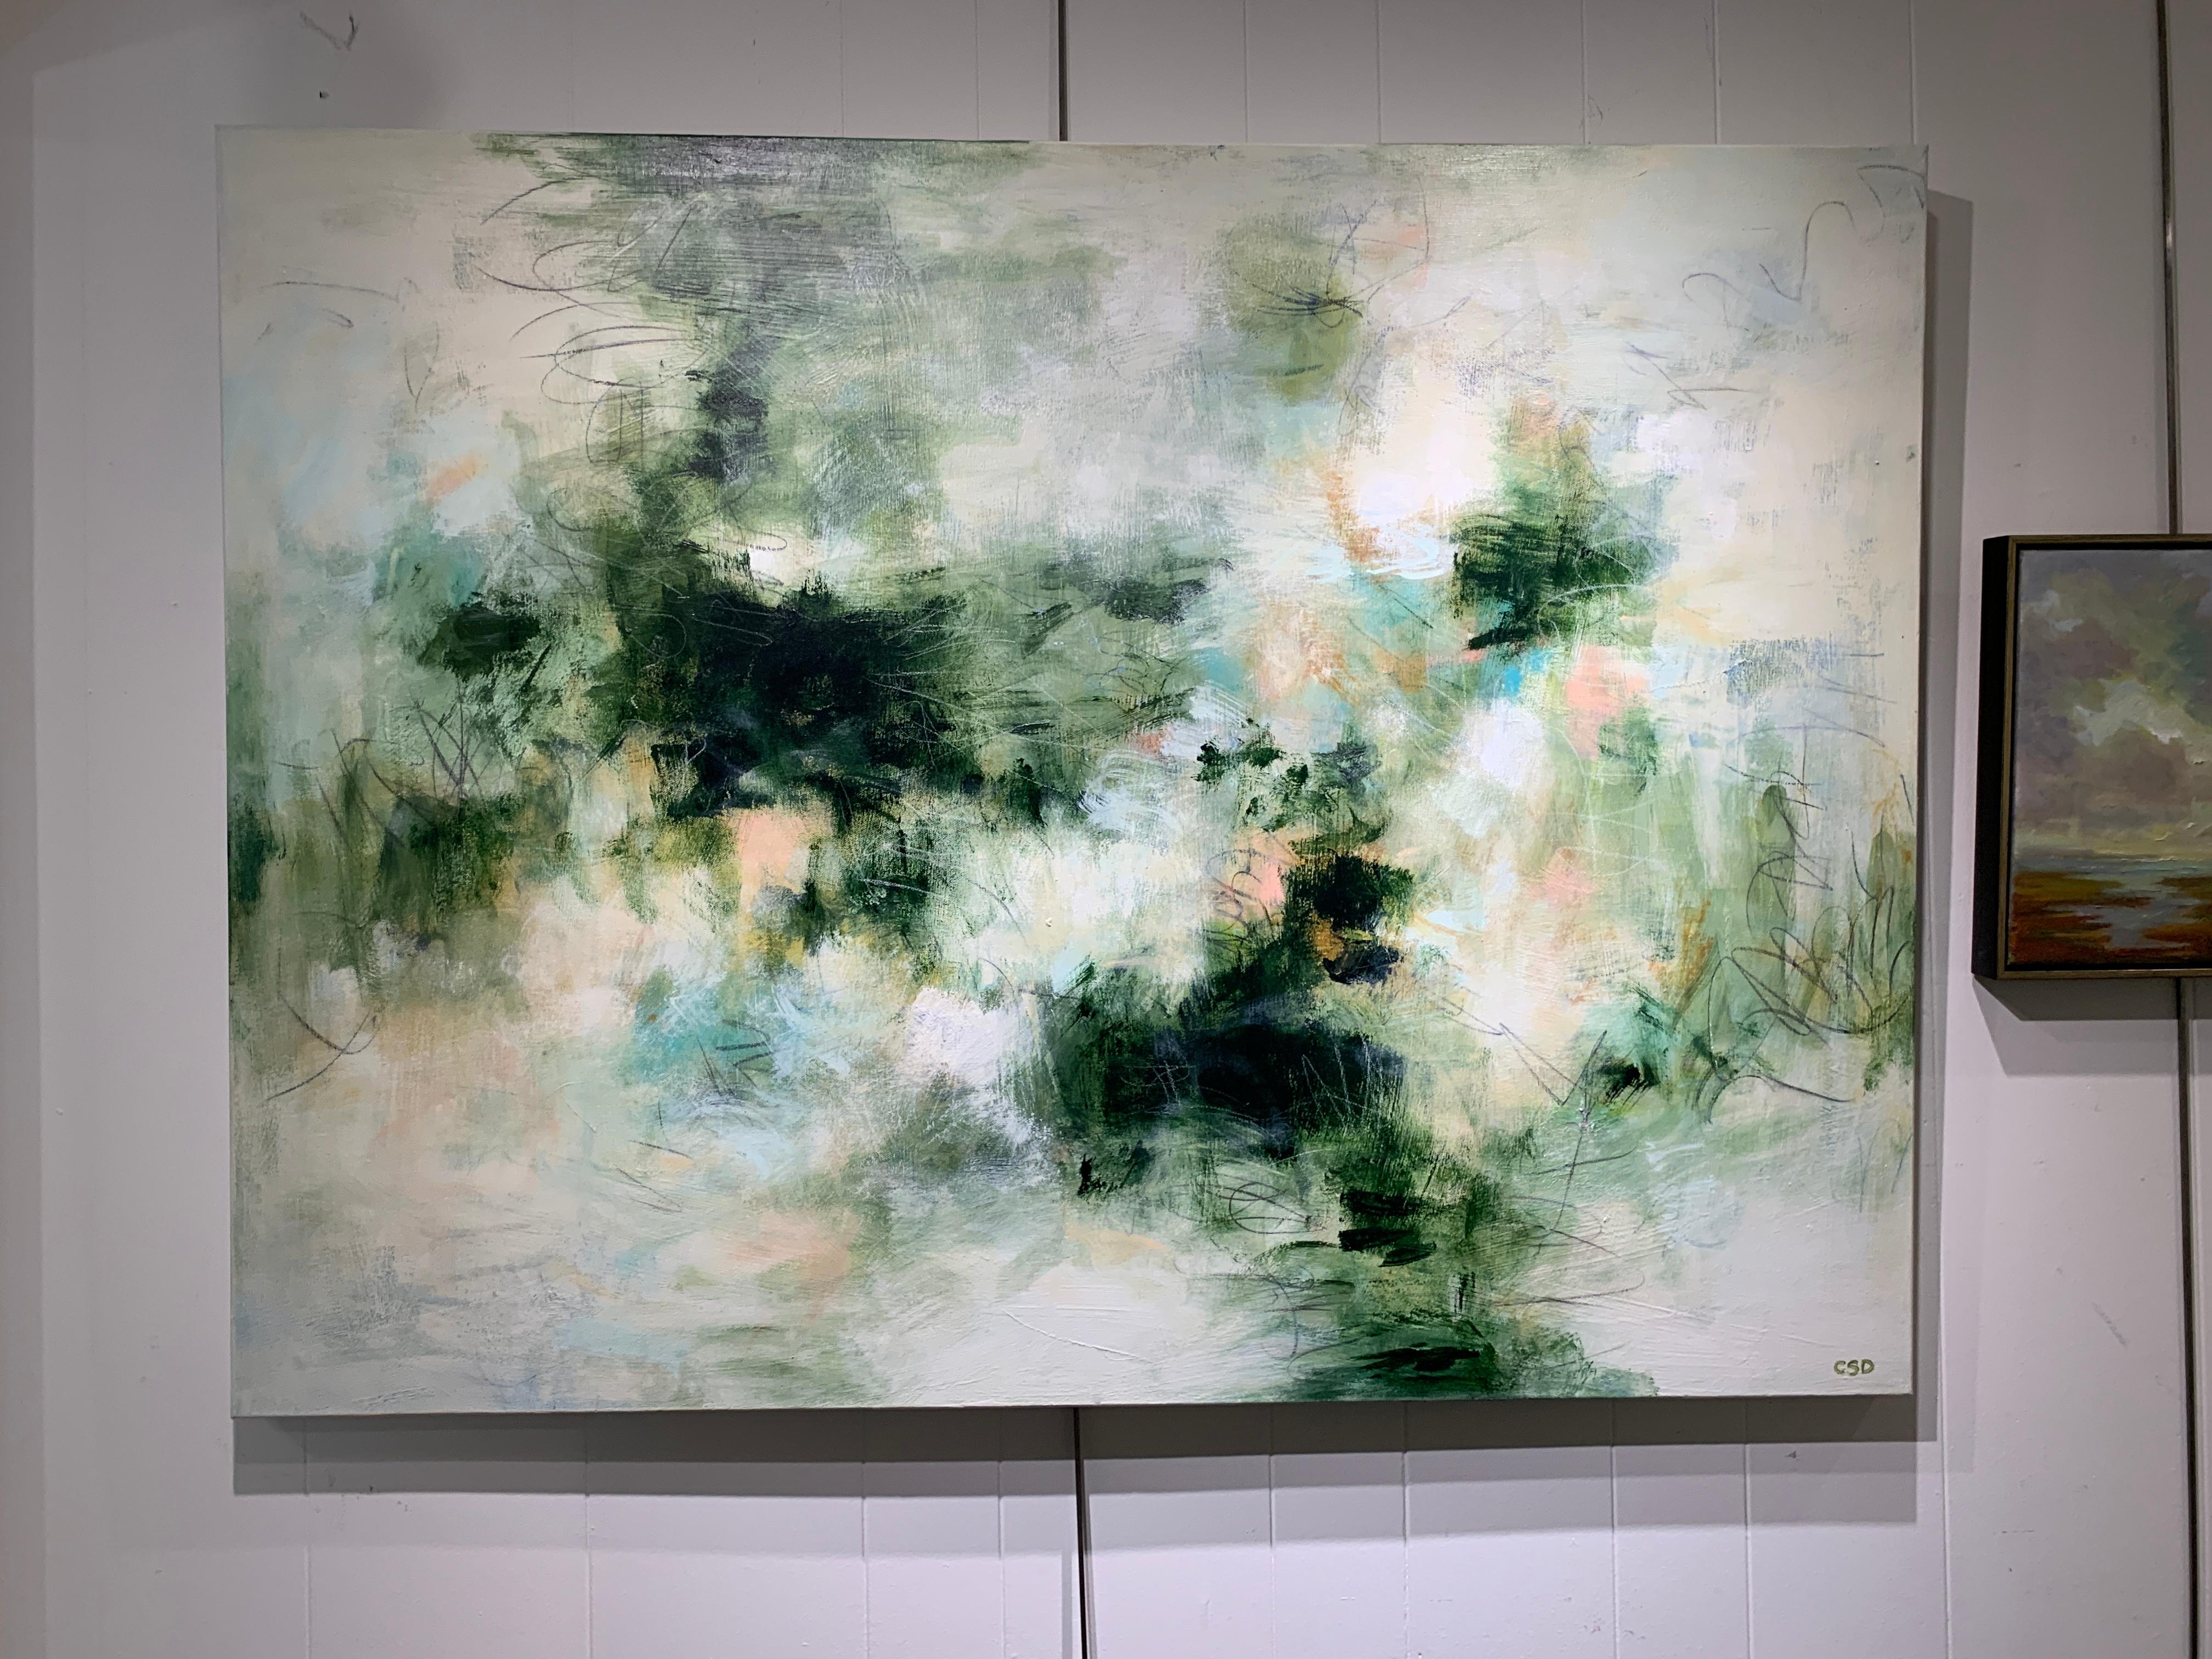 'Green Demijohns' is a large abstract expressionist mixed media on canvas painting created by American artist Christina Doelling in 2019. Featuring a palette made of green tonalities with pink and white accents highlighted with bold marks, the